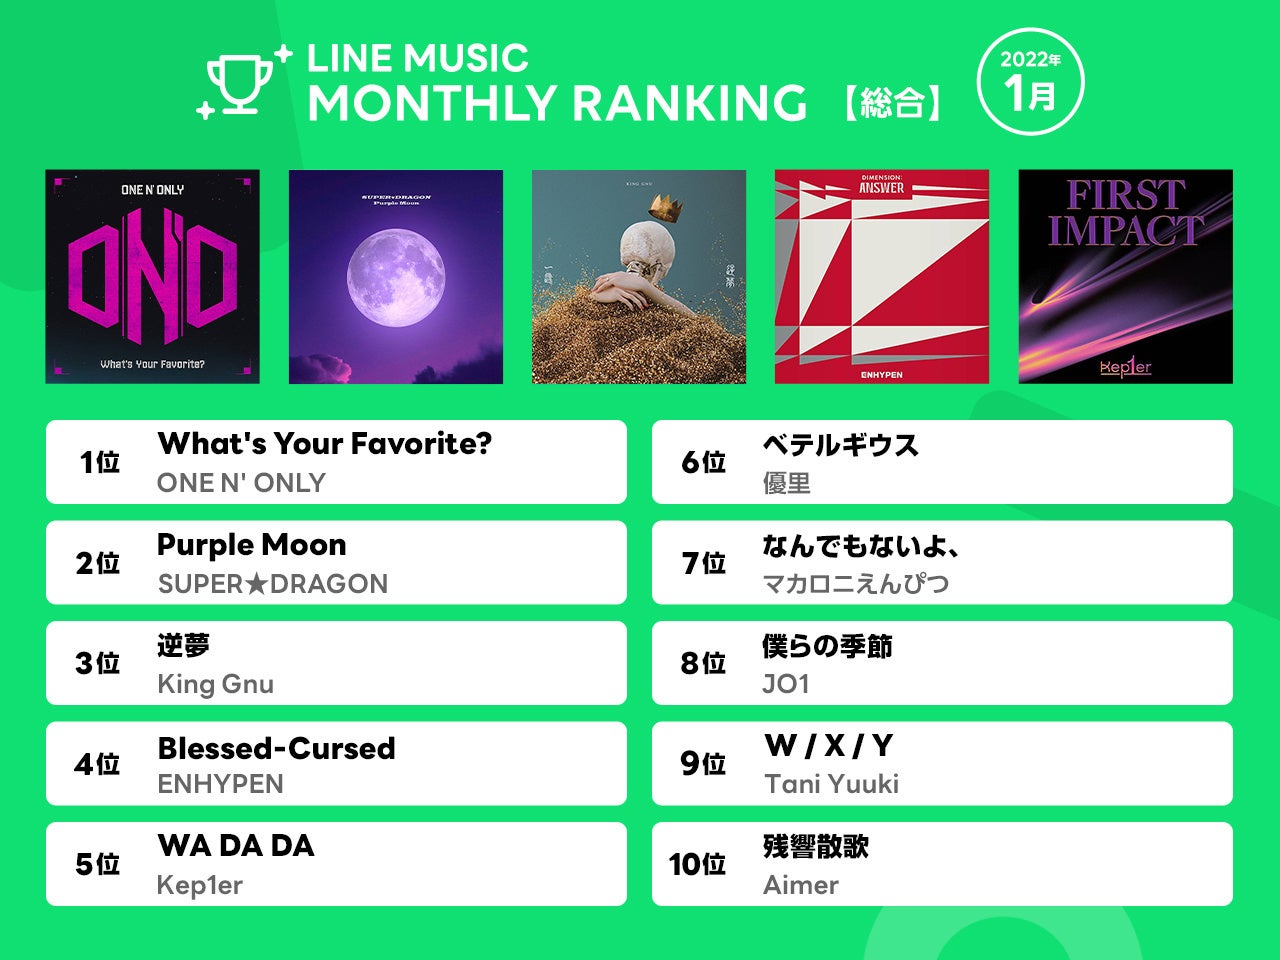 【LINE MUSIC 月間ランキング】1位ONE N‘ ONLY「What’s Your Favorite?」、2位 SUPER★DRAGON「Purple Moon」、3位King Gnu「逆夢」